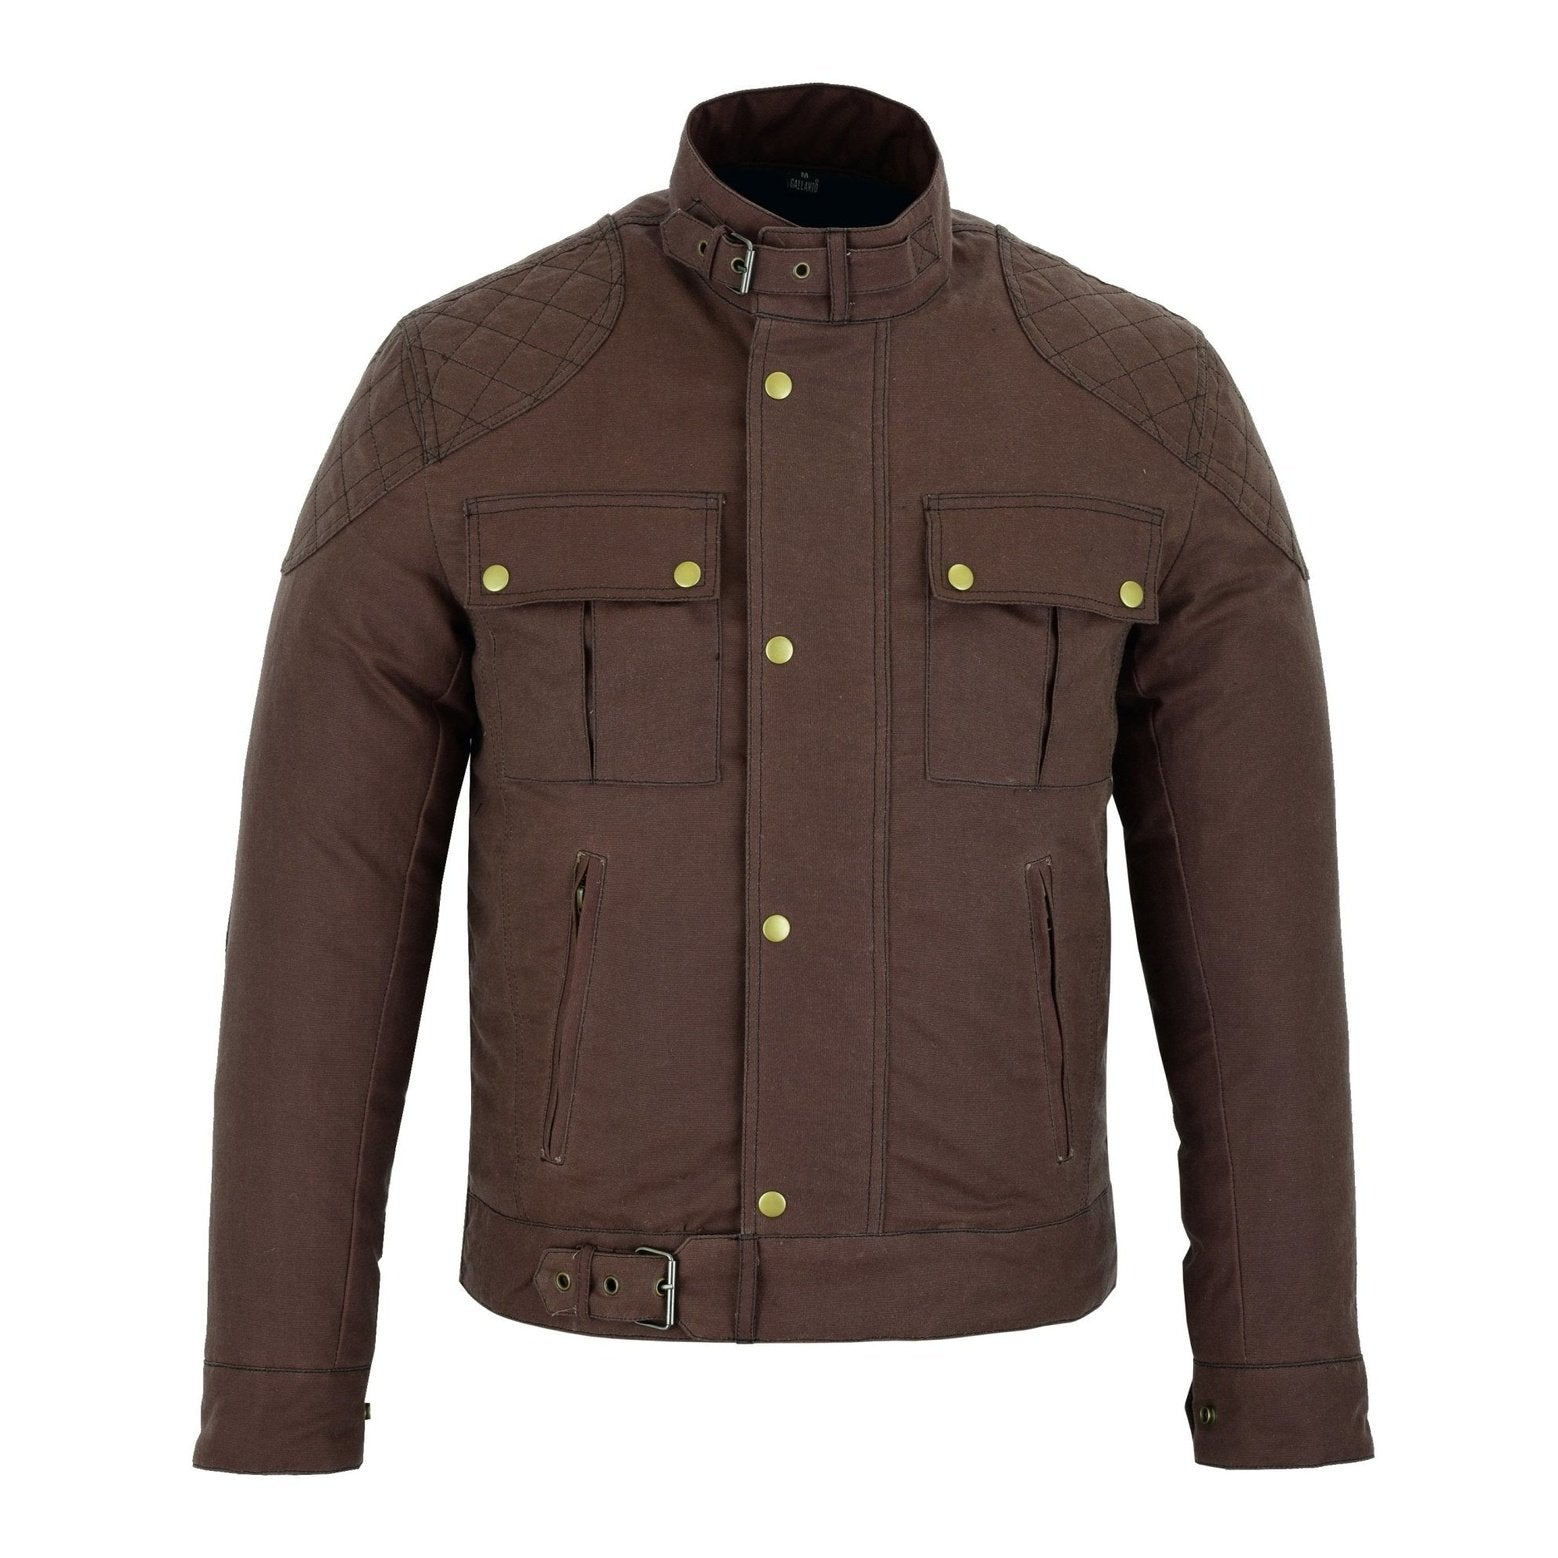 Classic Brown Waxed Cotton Motorcycle Jacket Textile for Biker ...